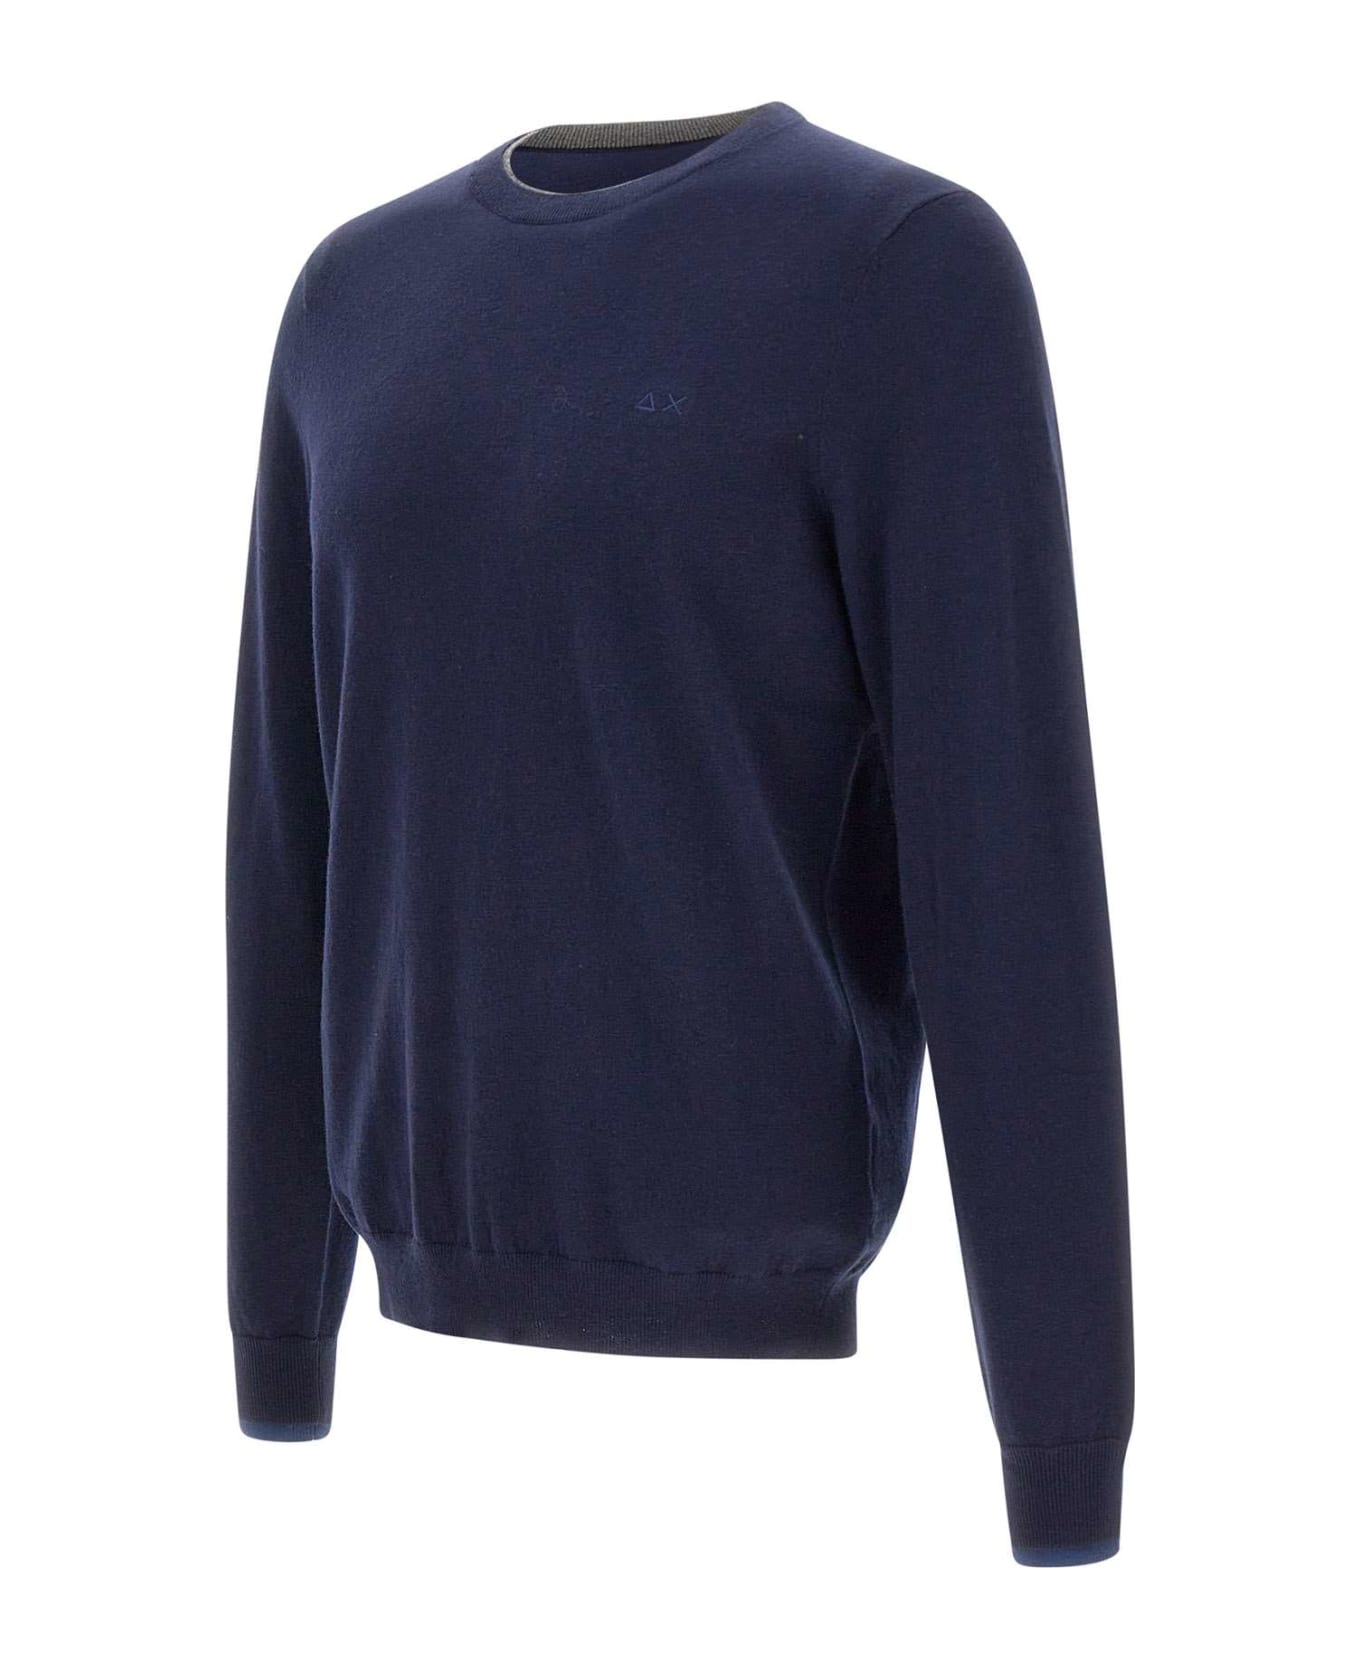 Sun 68 'round Double' Cotton And Wool Pullover Sweater - NAVY BLUE